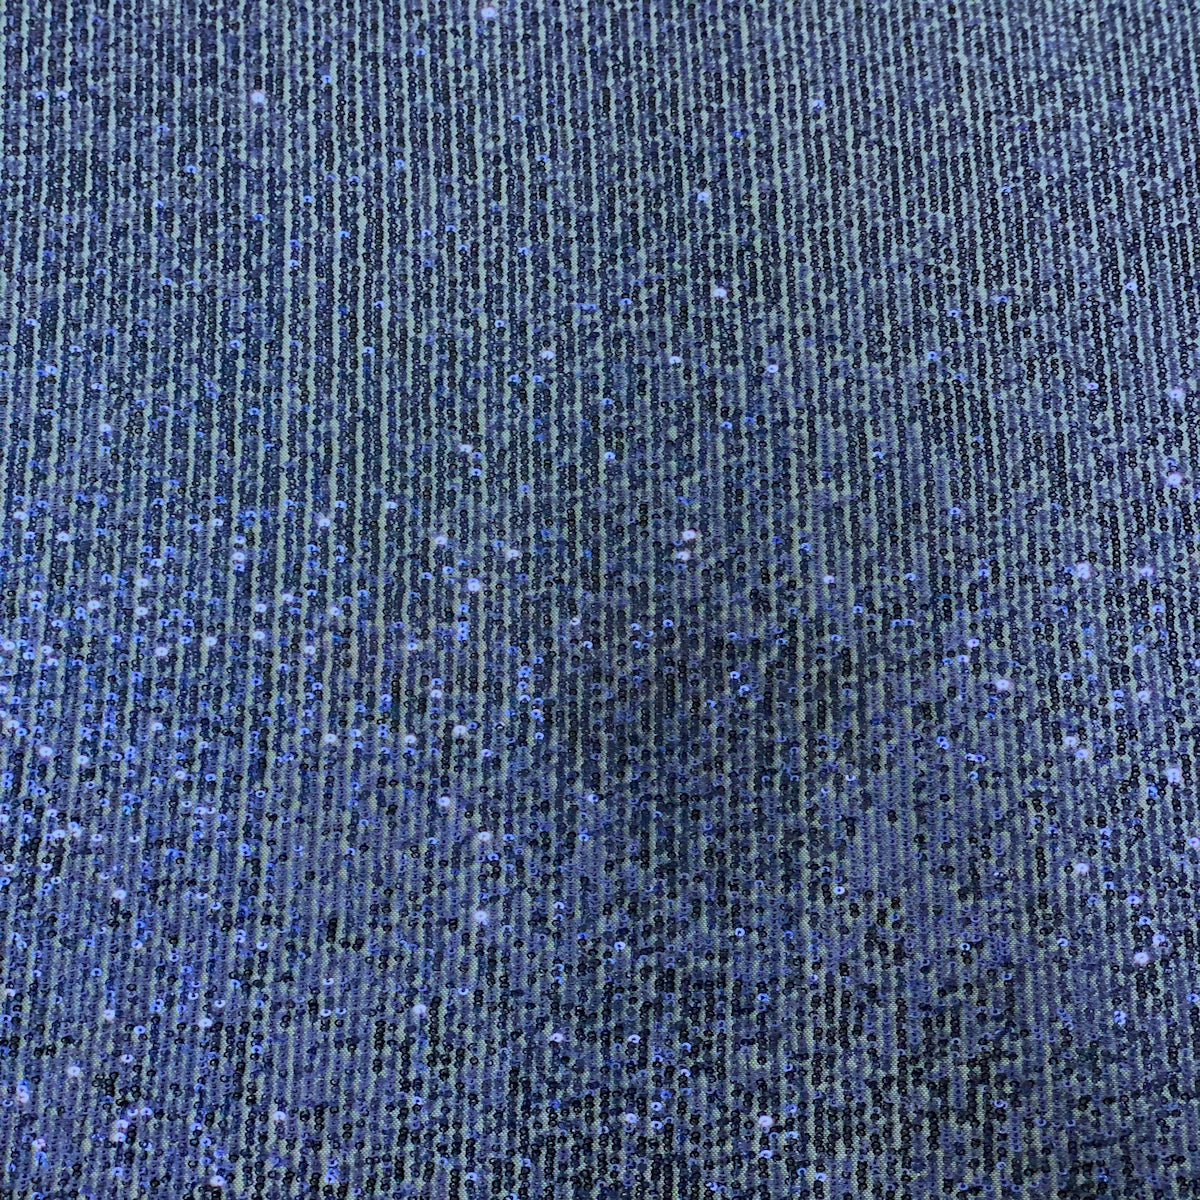 Navy Blue Mille Striped Stretch Sequins Lace Fabric - Fashion Fabrics LLC